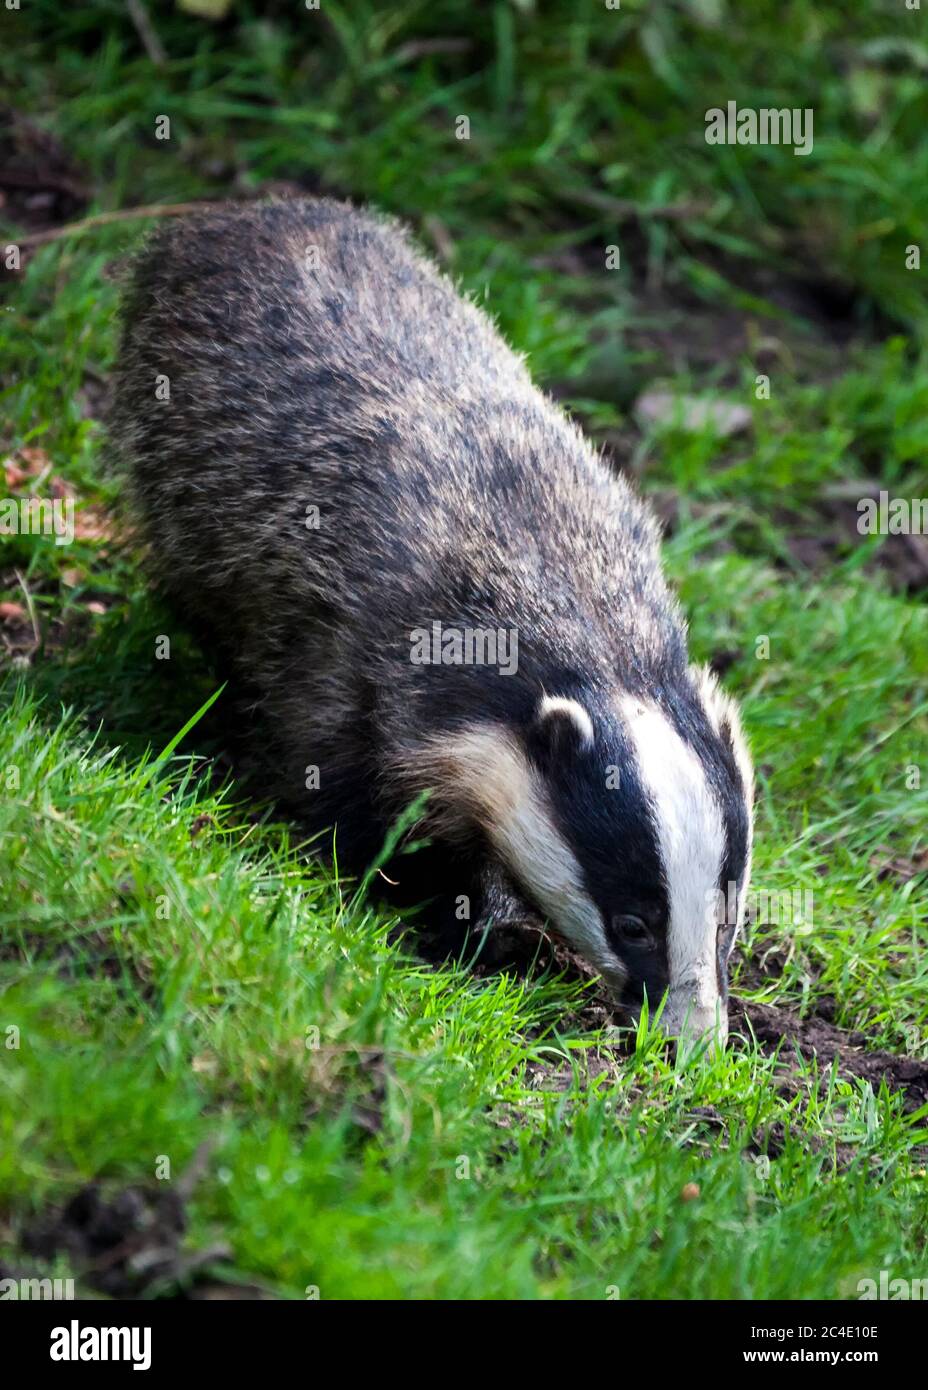 Badger which is a black and white wild animal feeding in woodland forests Stock Photo